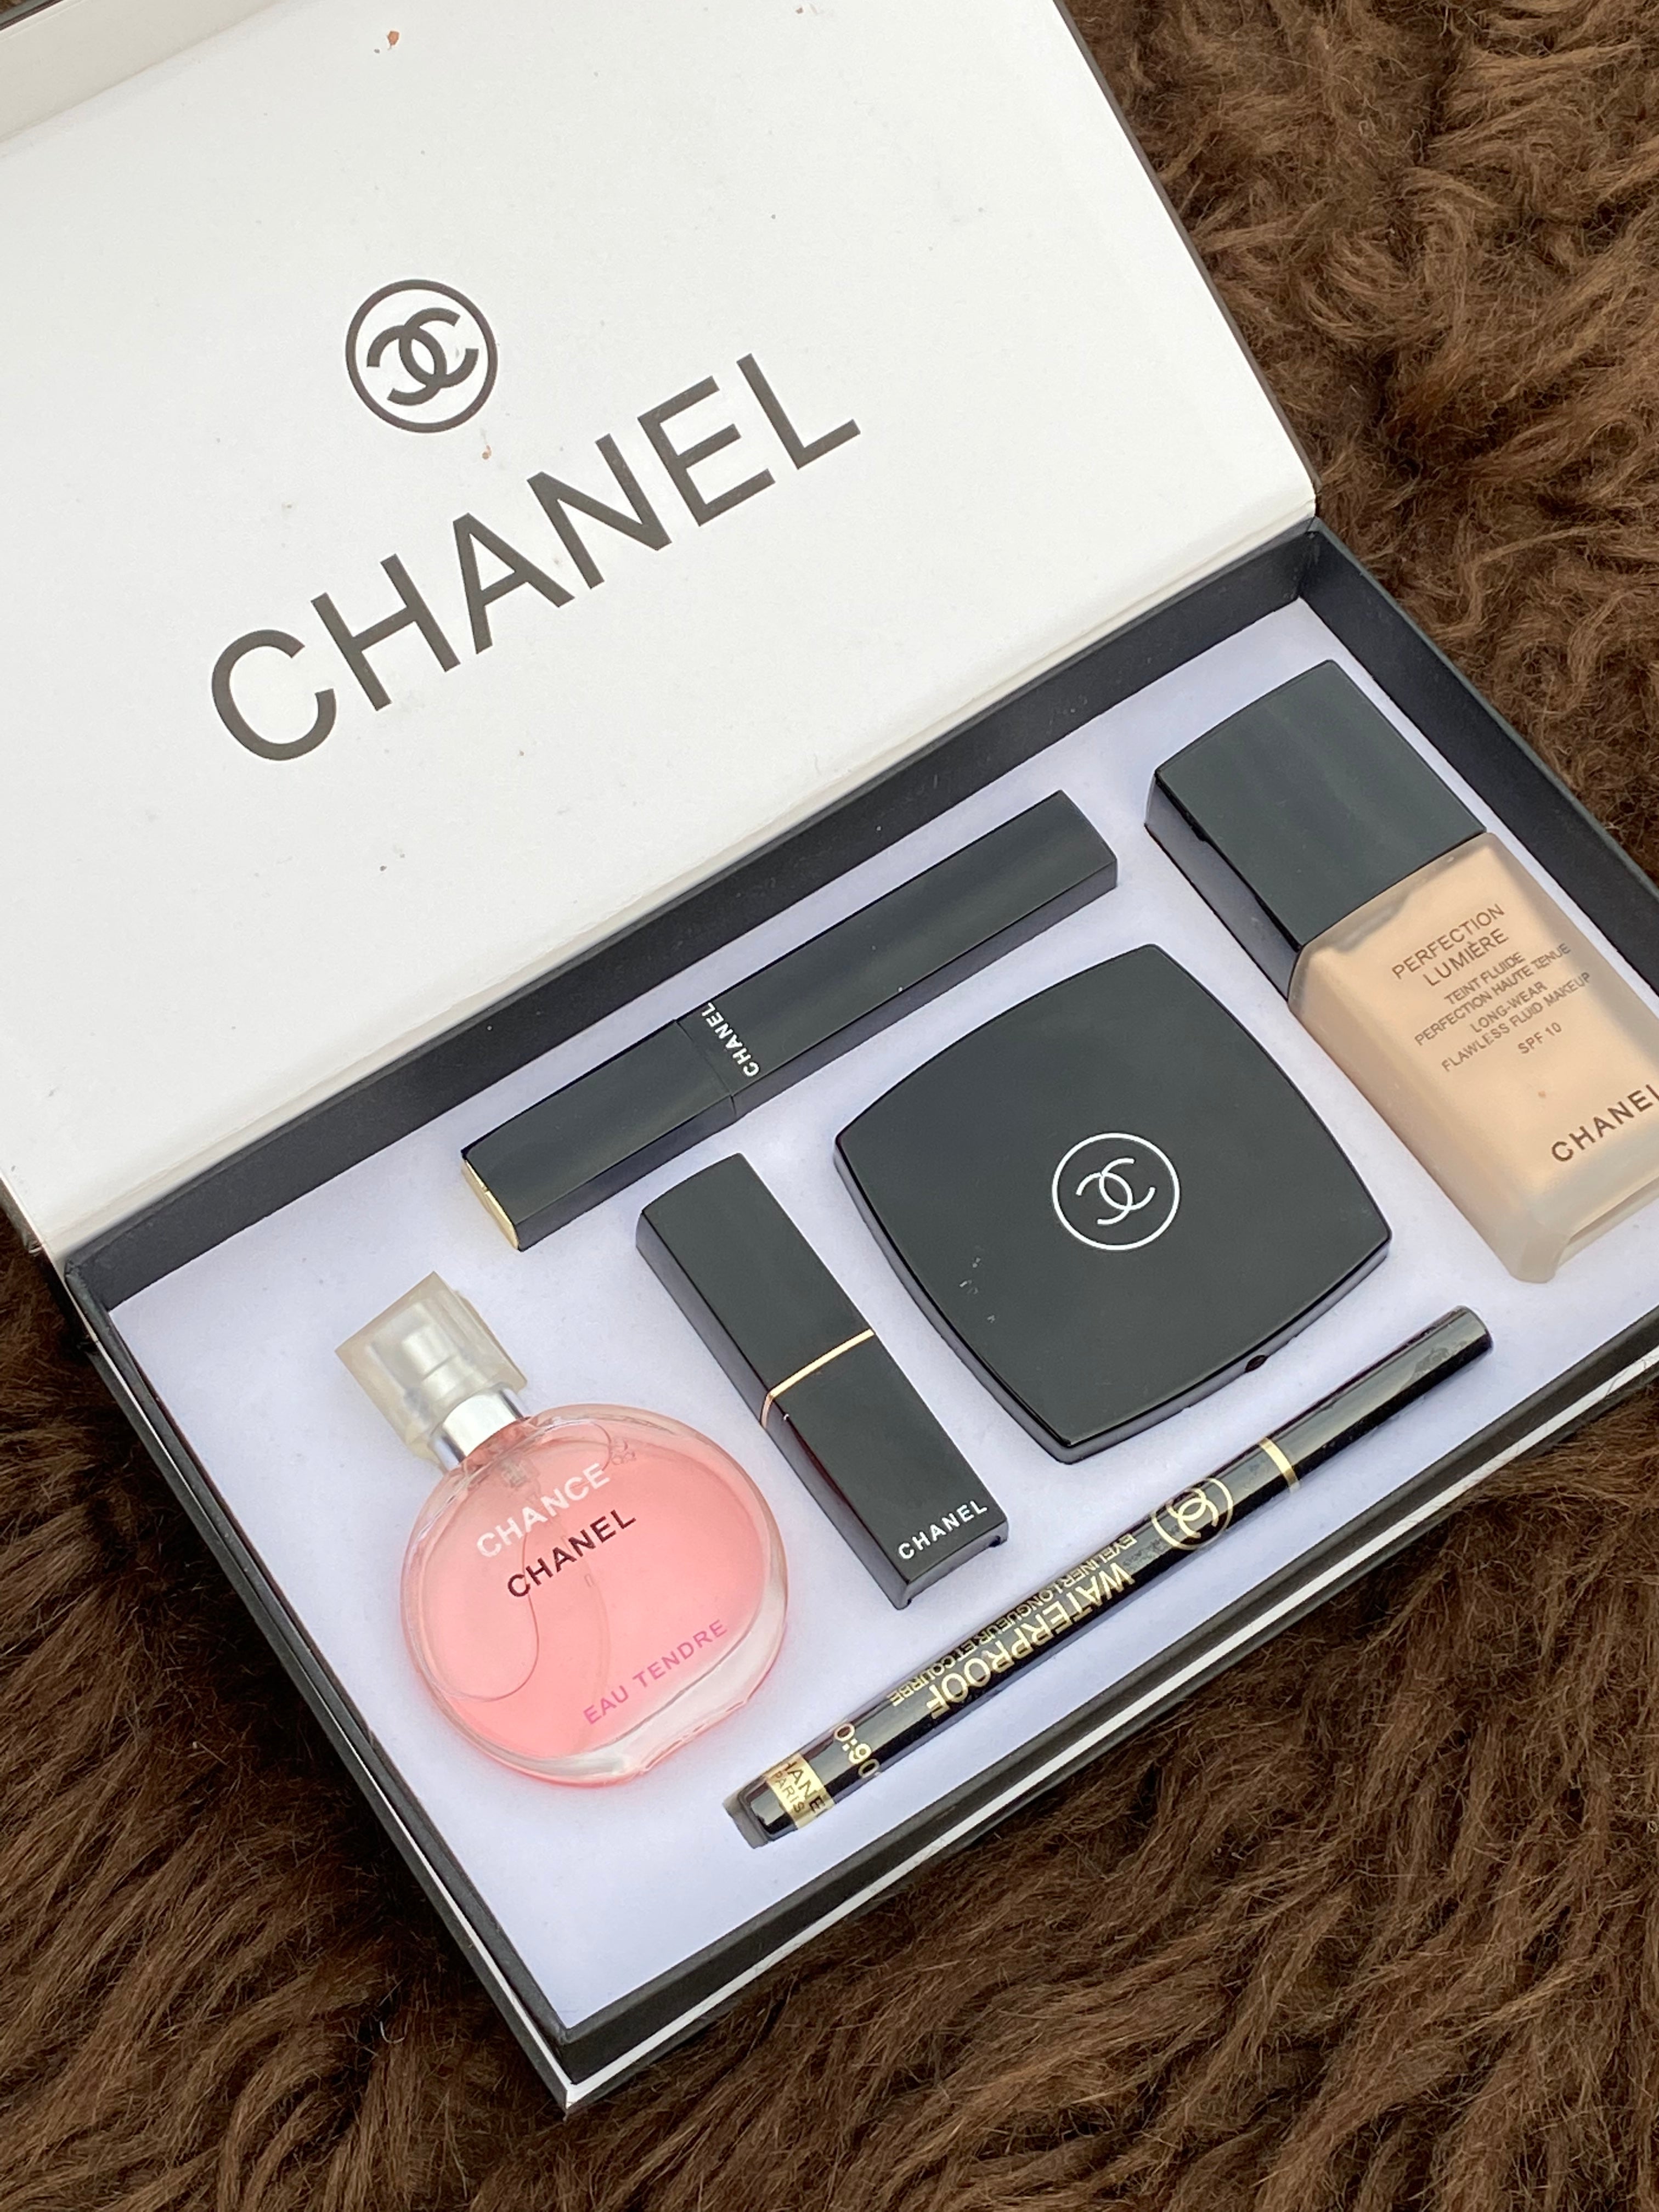 CHANEL GIFT SET 6in1